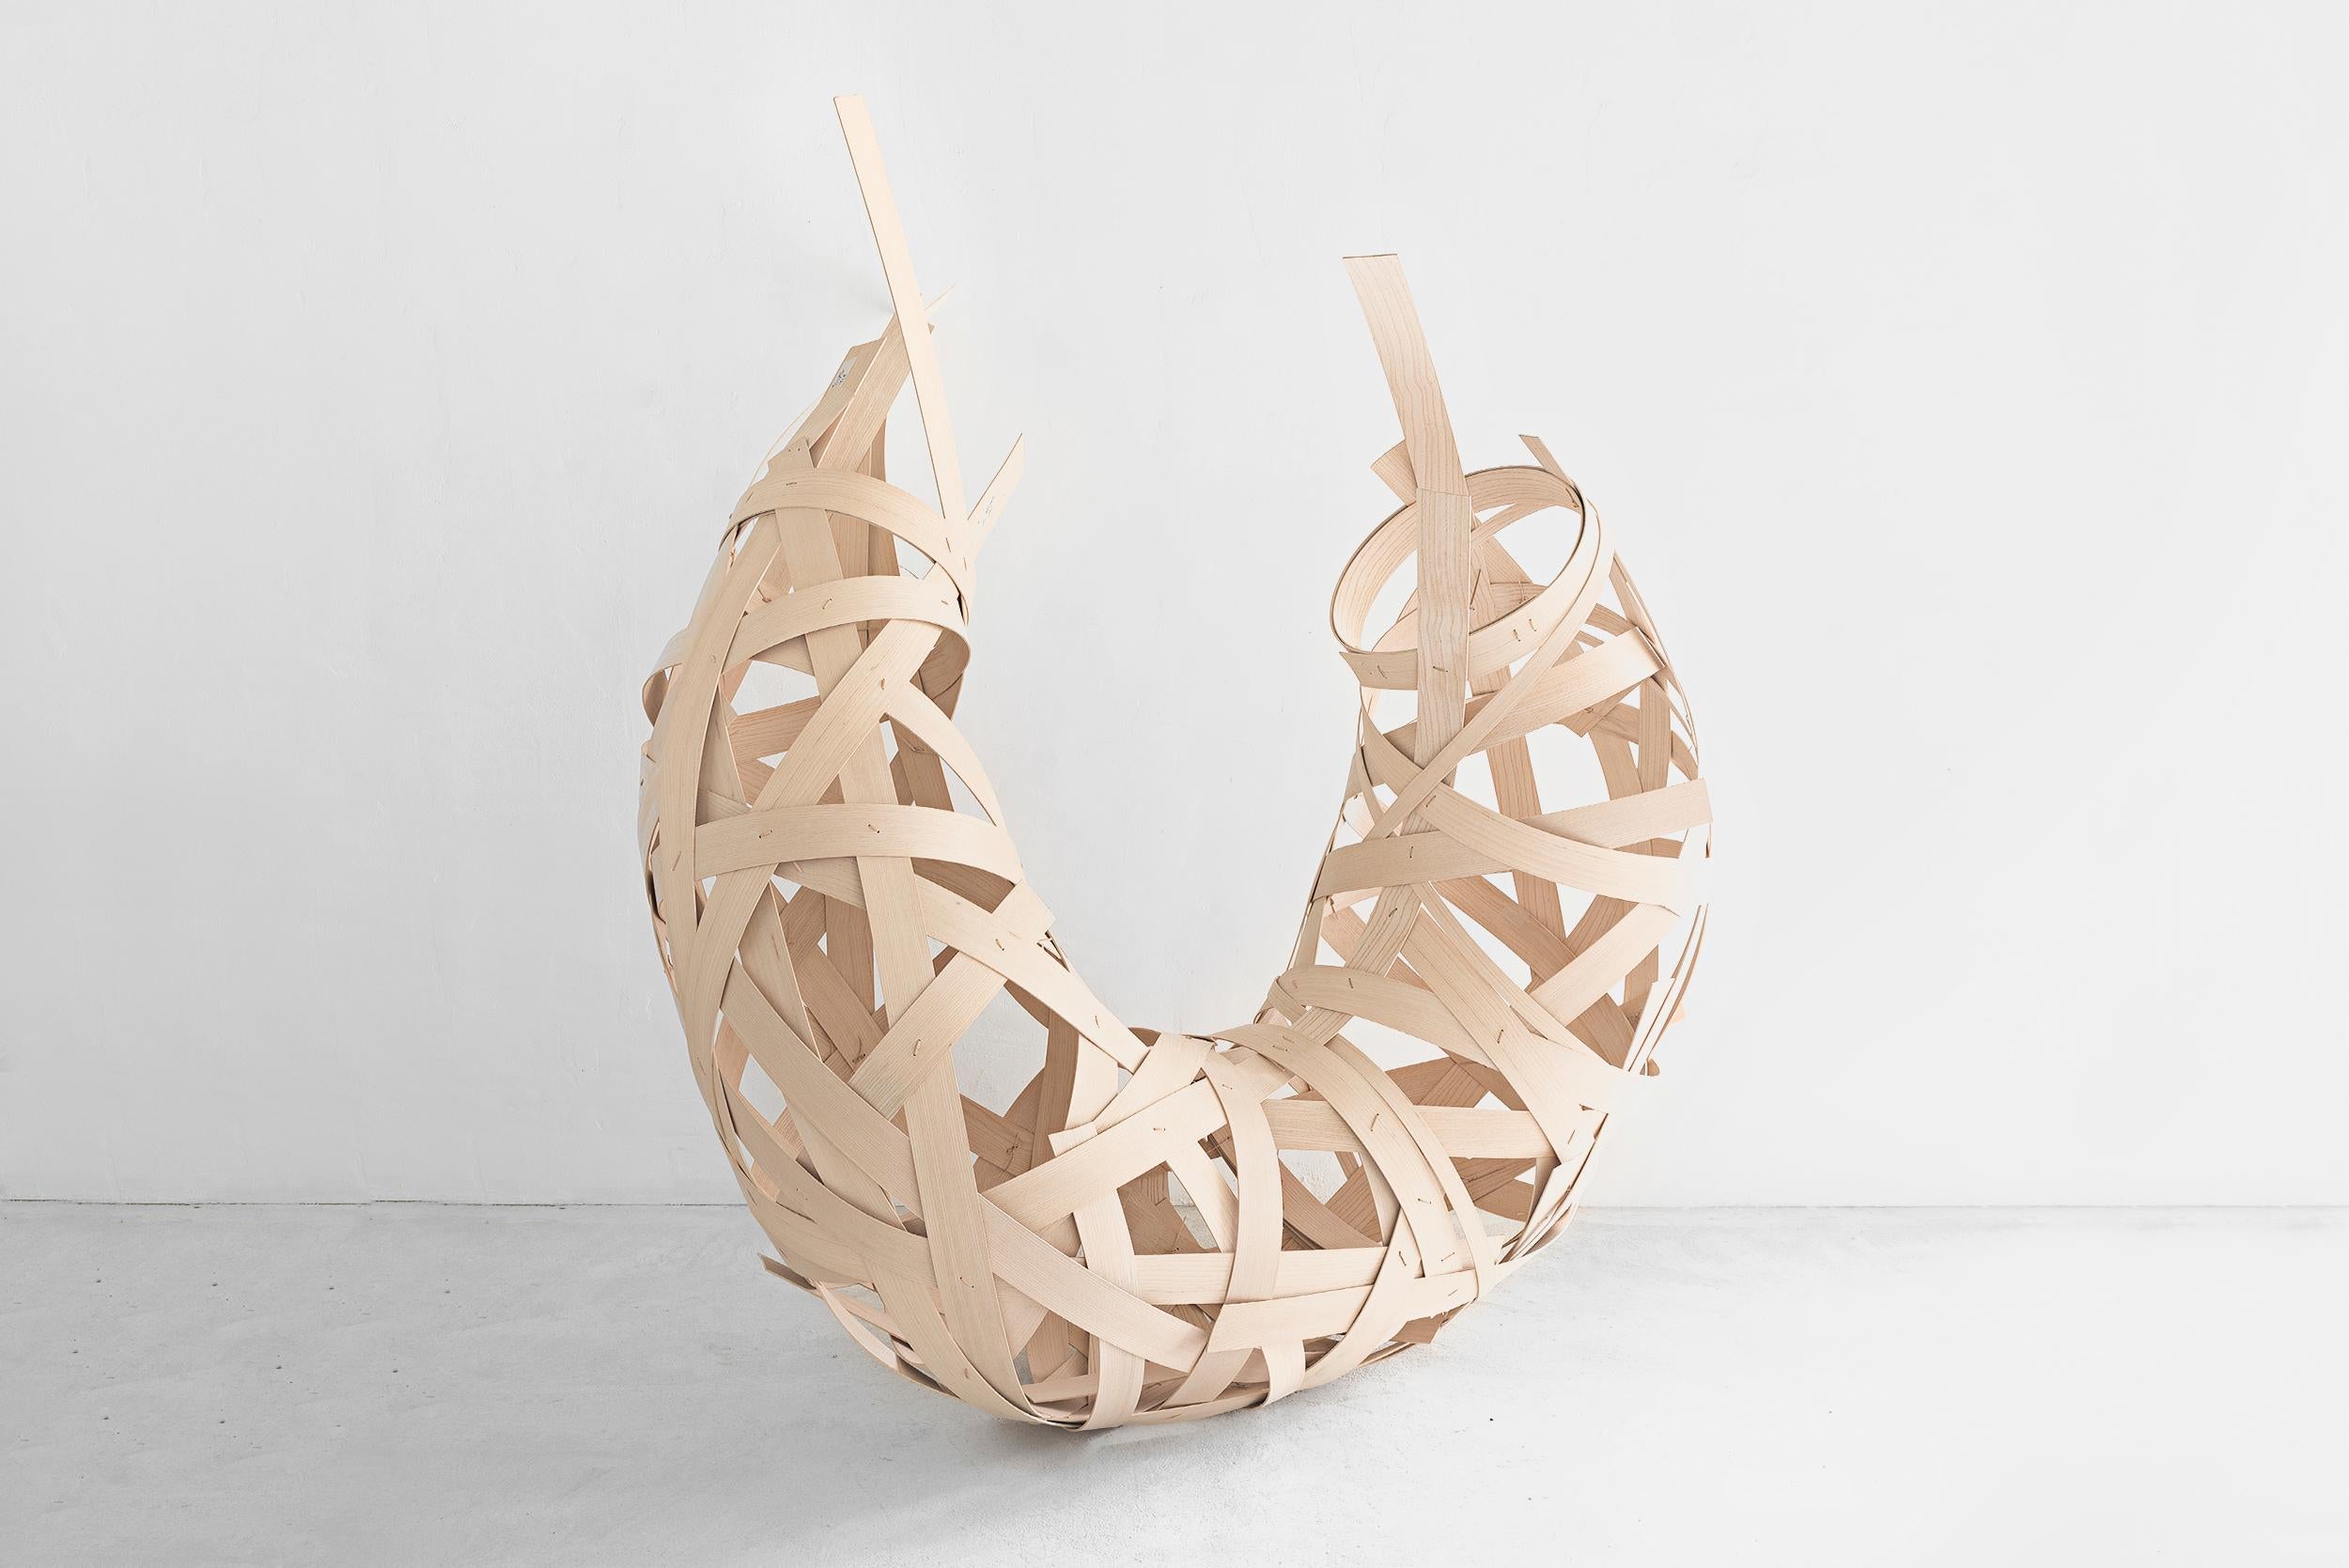 Annemarie O´Sullivan
Curl
Manufactured by Annemarie O´Sullivan
England, 2019
Finger jointed ash and cane”

Measurements
150 cm x 200 cm height
59 in x 78,74 in height

Concept
Curl is one of Annemarie’s architectural woven forms. Working mainly with